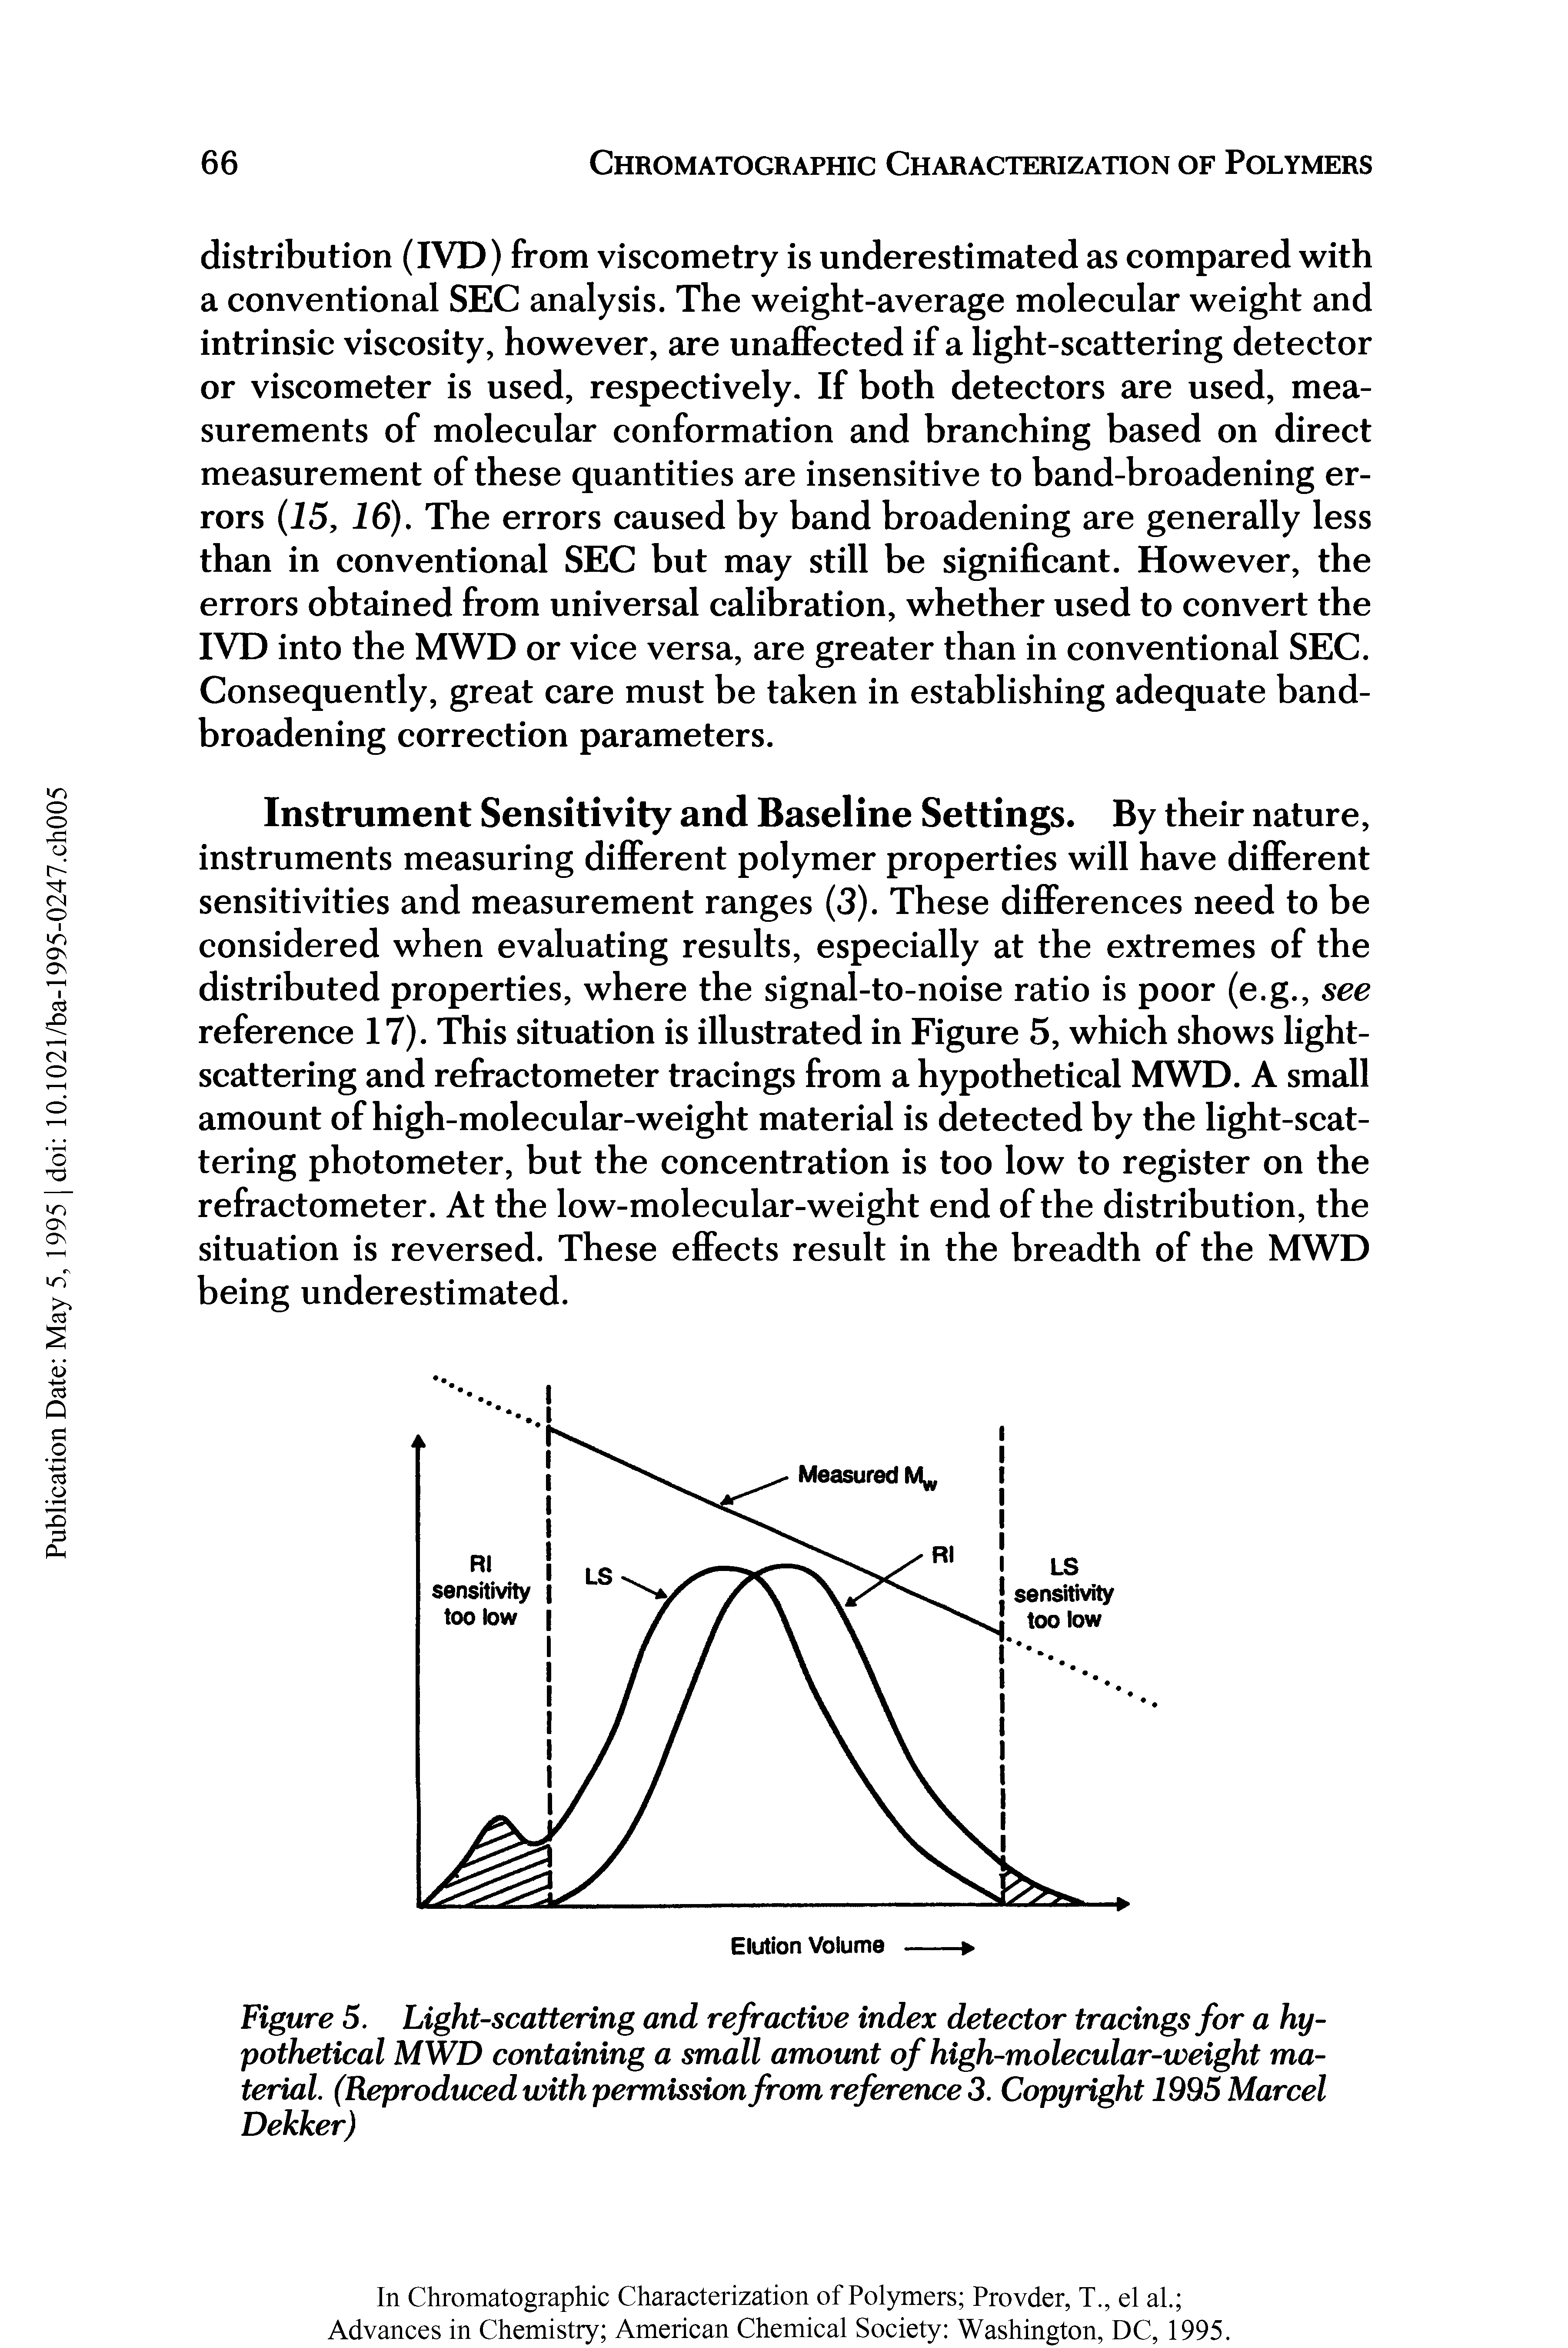 Figure 5. Light-scattering and refractive index detector tracings for a hypothetical MWD containing a small amount of high-molecular-weight material. (Reproduced with permission from reference 3. Copyright 1995 Marcel Dekker)...